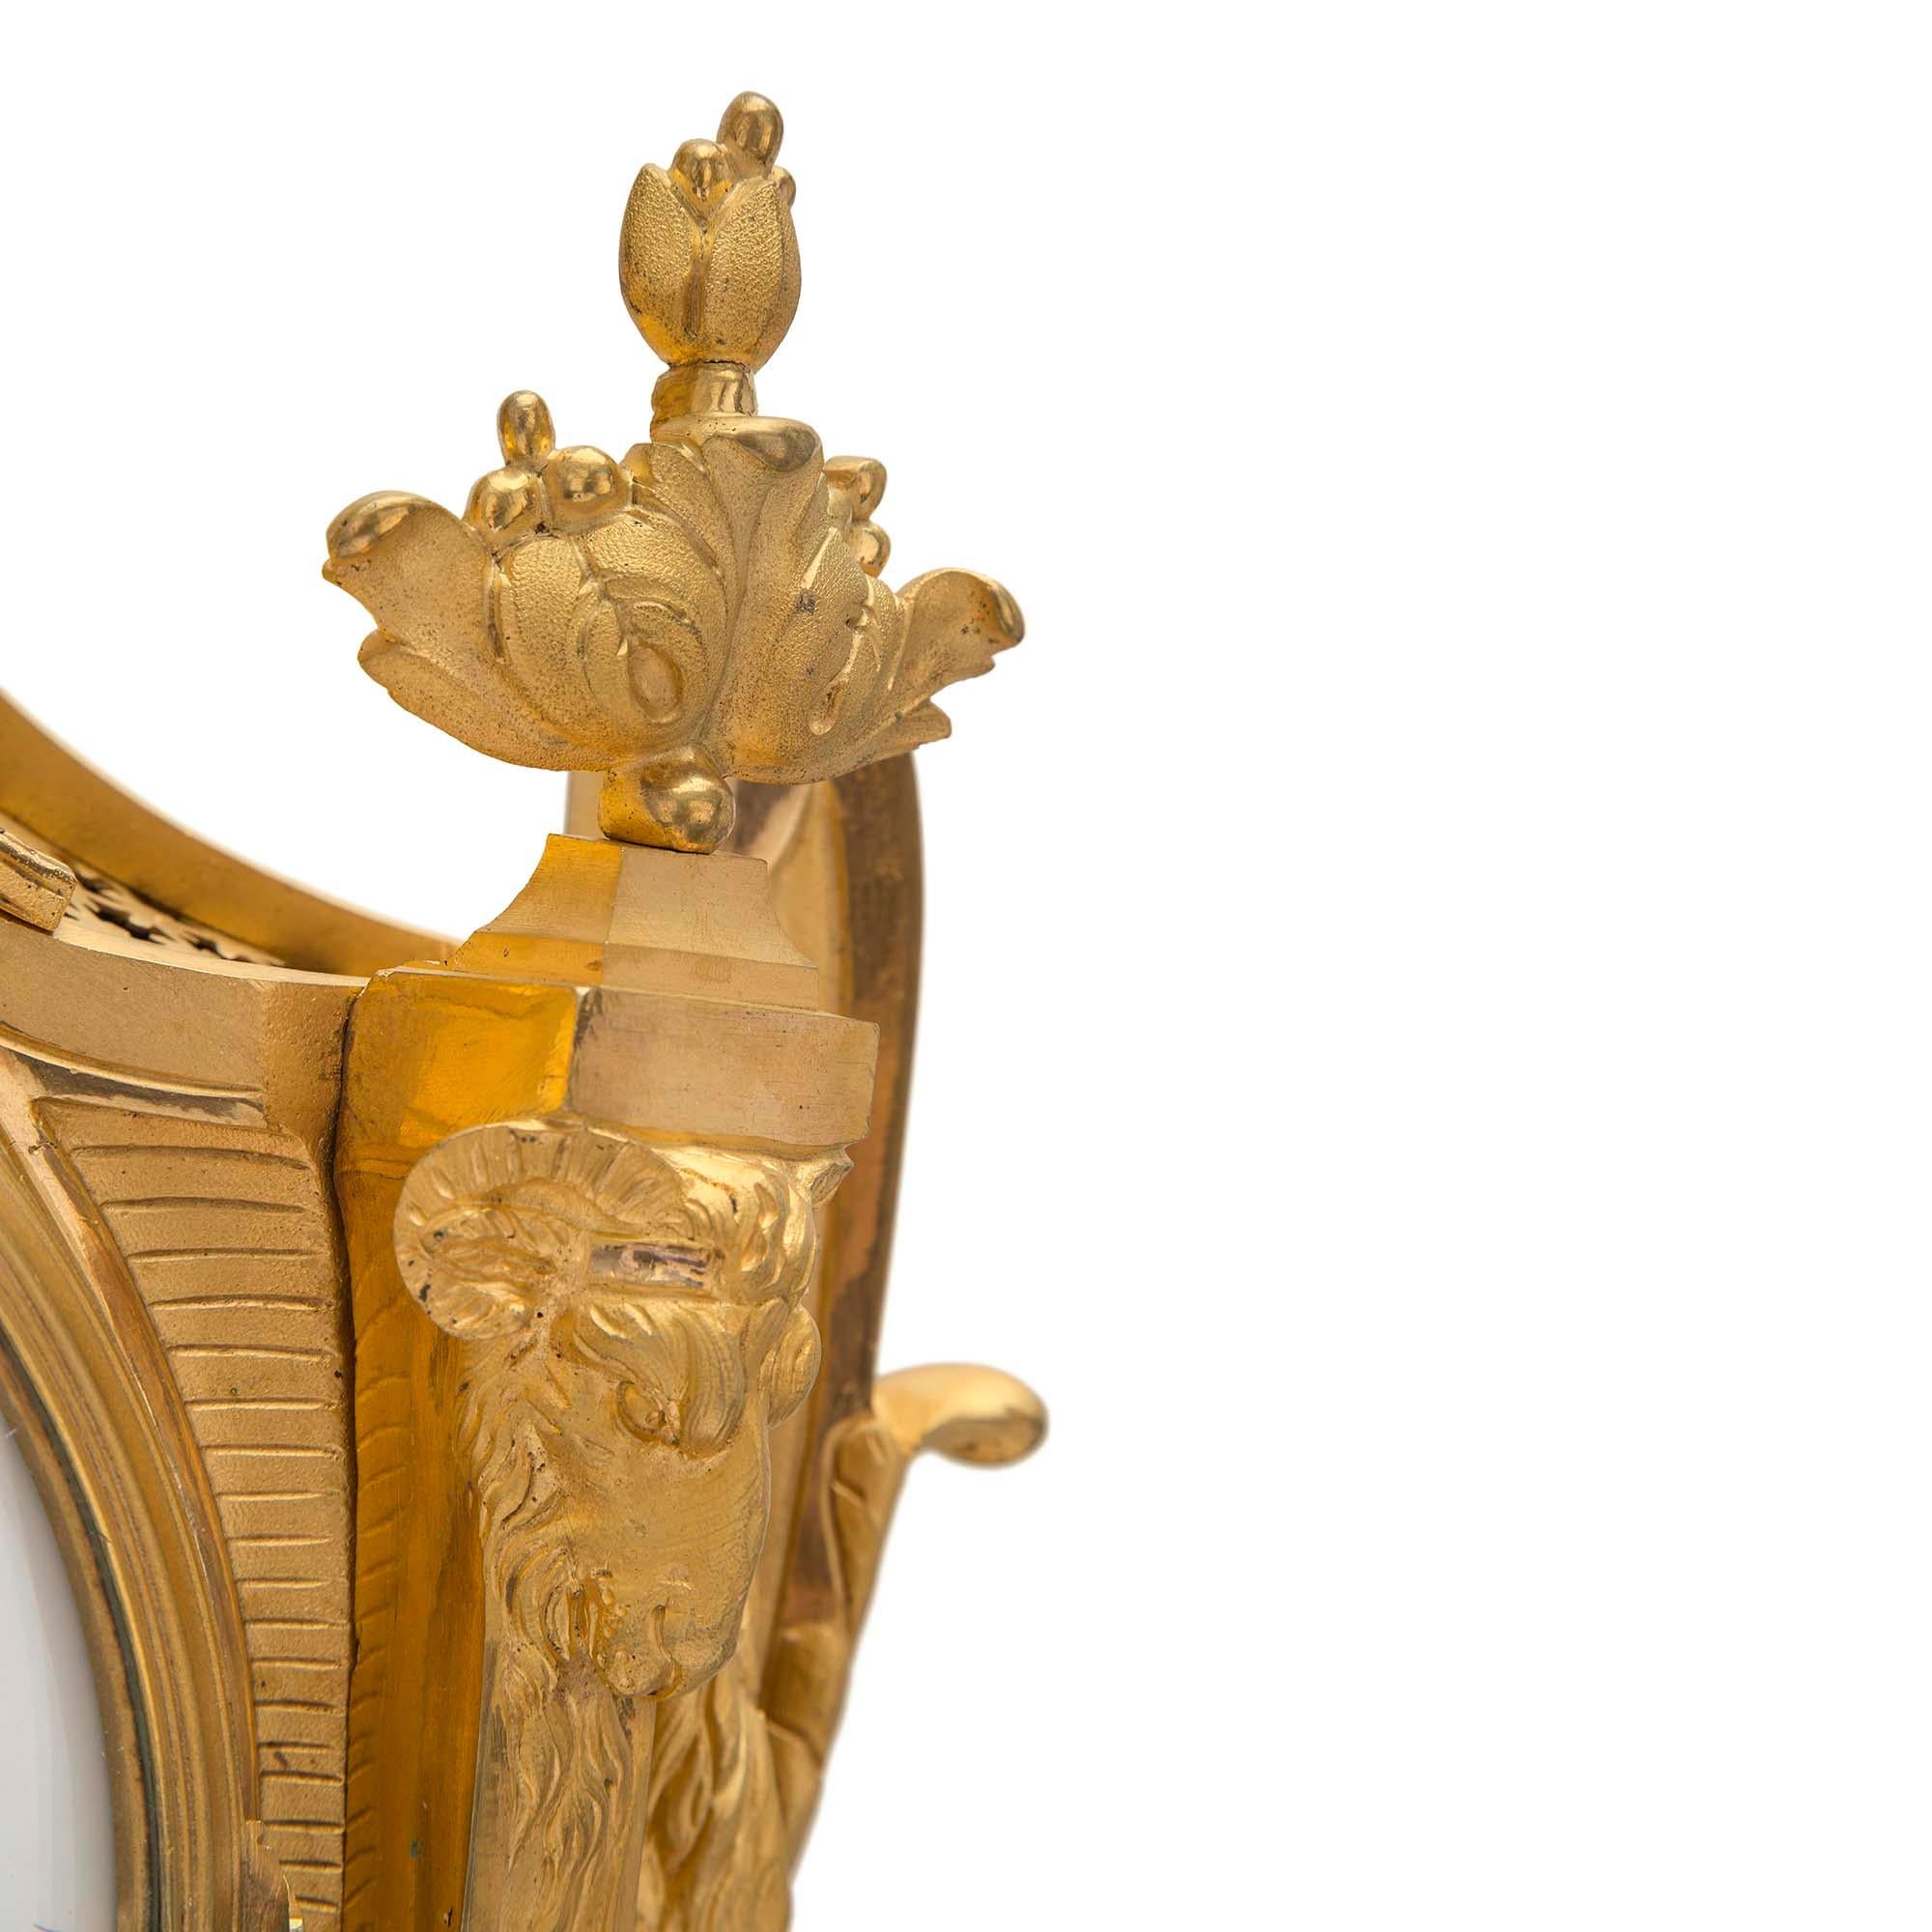 French 19th Century Louis XVI Style Ormolu Cartel Clock, by L. Marchand For Sale 2